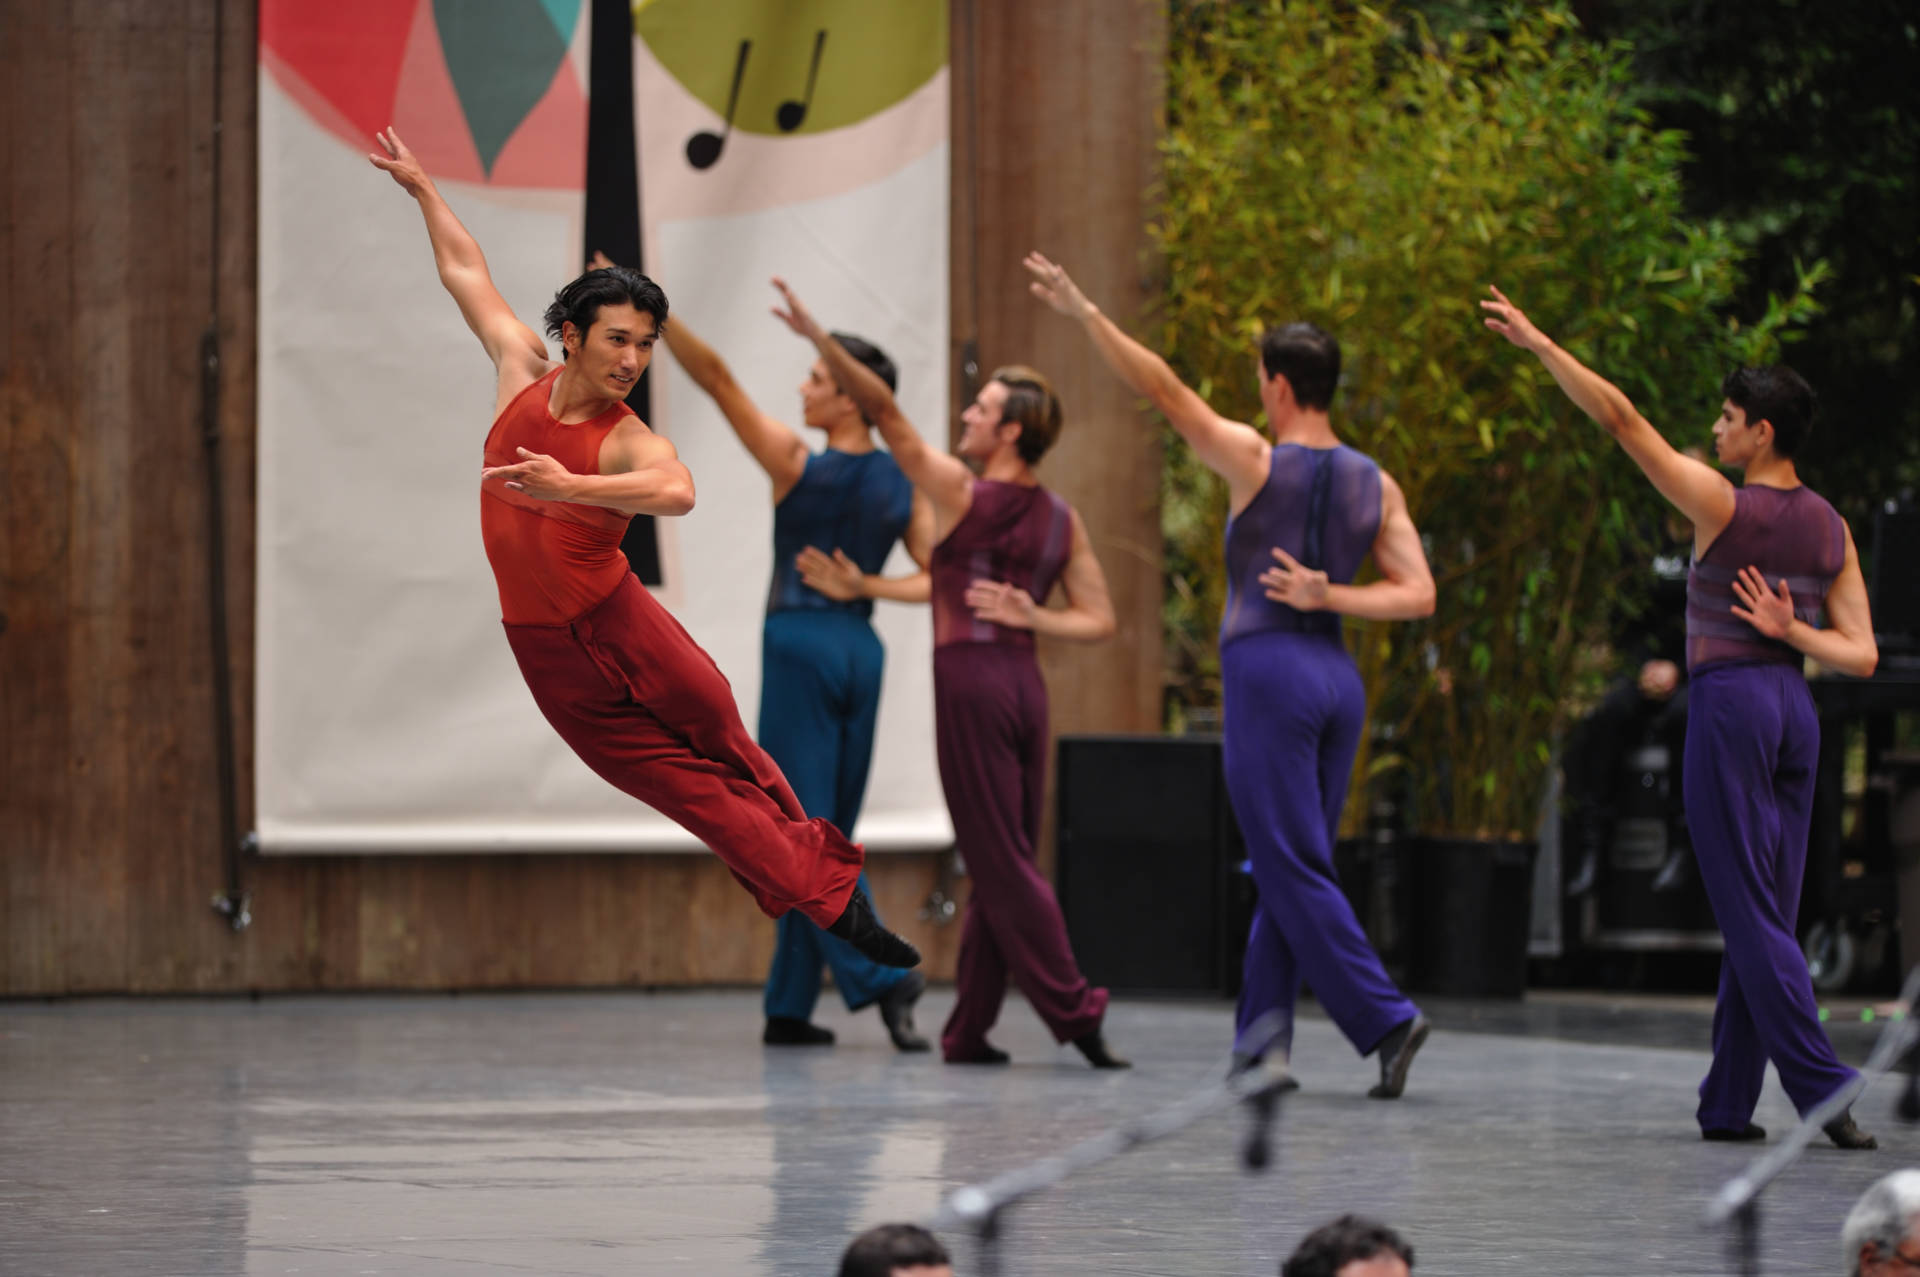 Hansuke Yamamoto and other dancers of San Francisco Ballet in Christopher Wheeldon's Rush© at the 2016 Stern Grove Festival 
(Photo: Erik Tomasson)